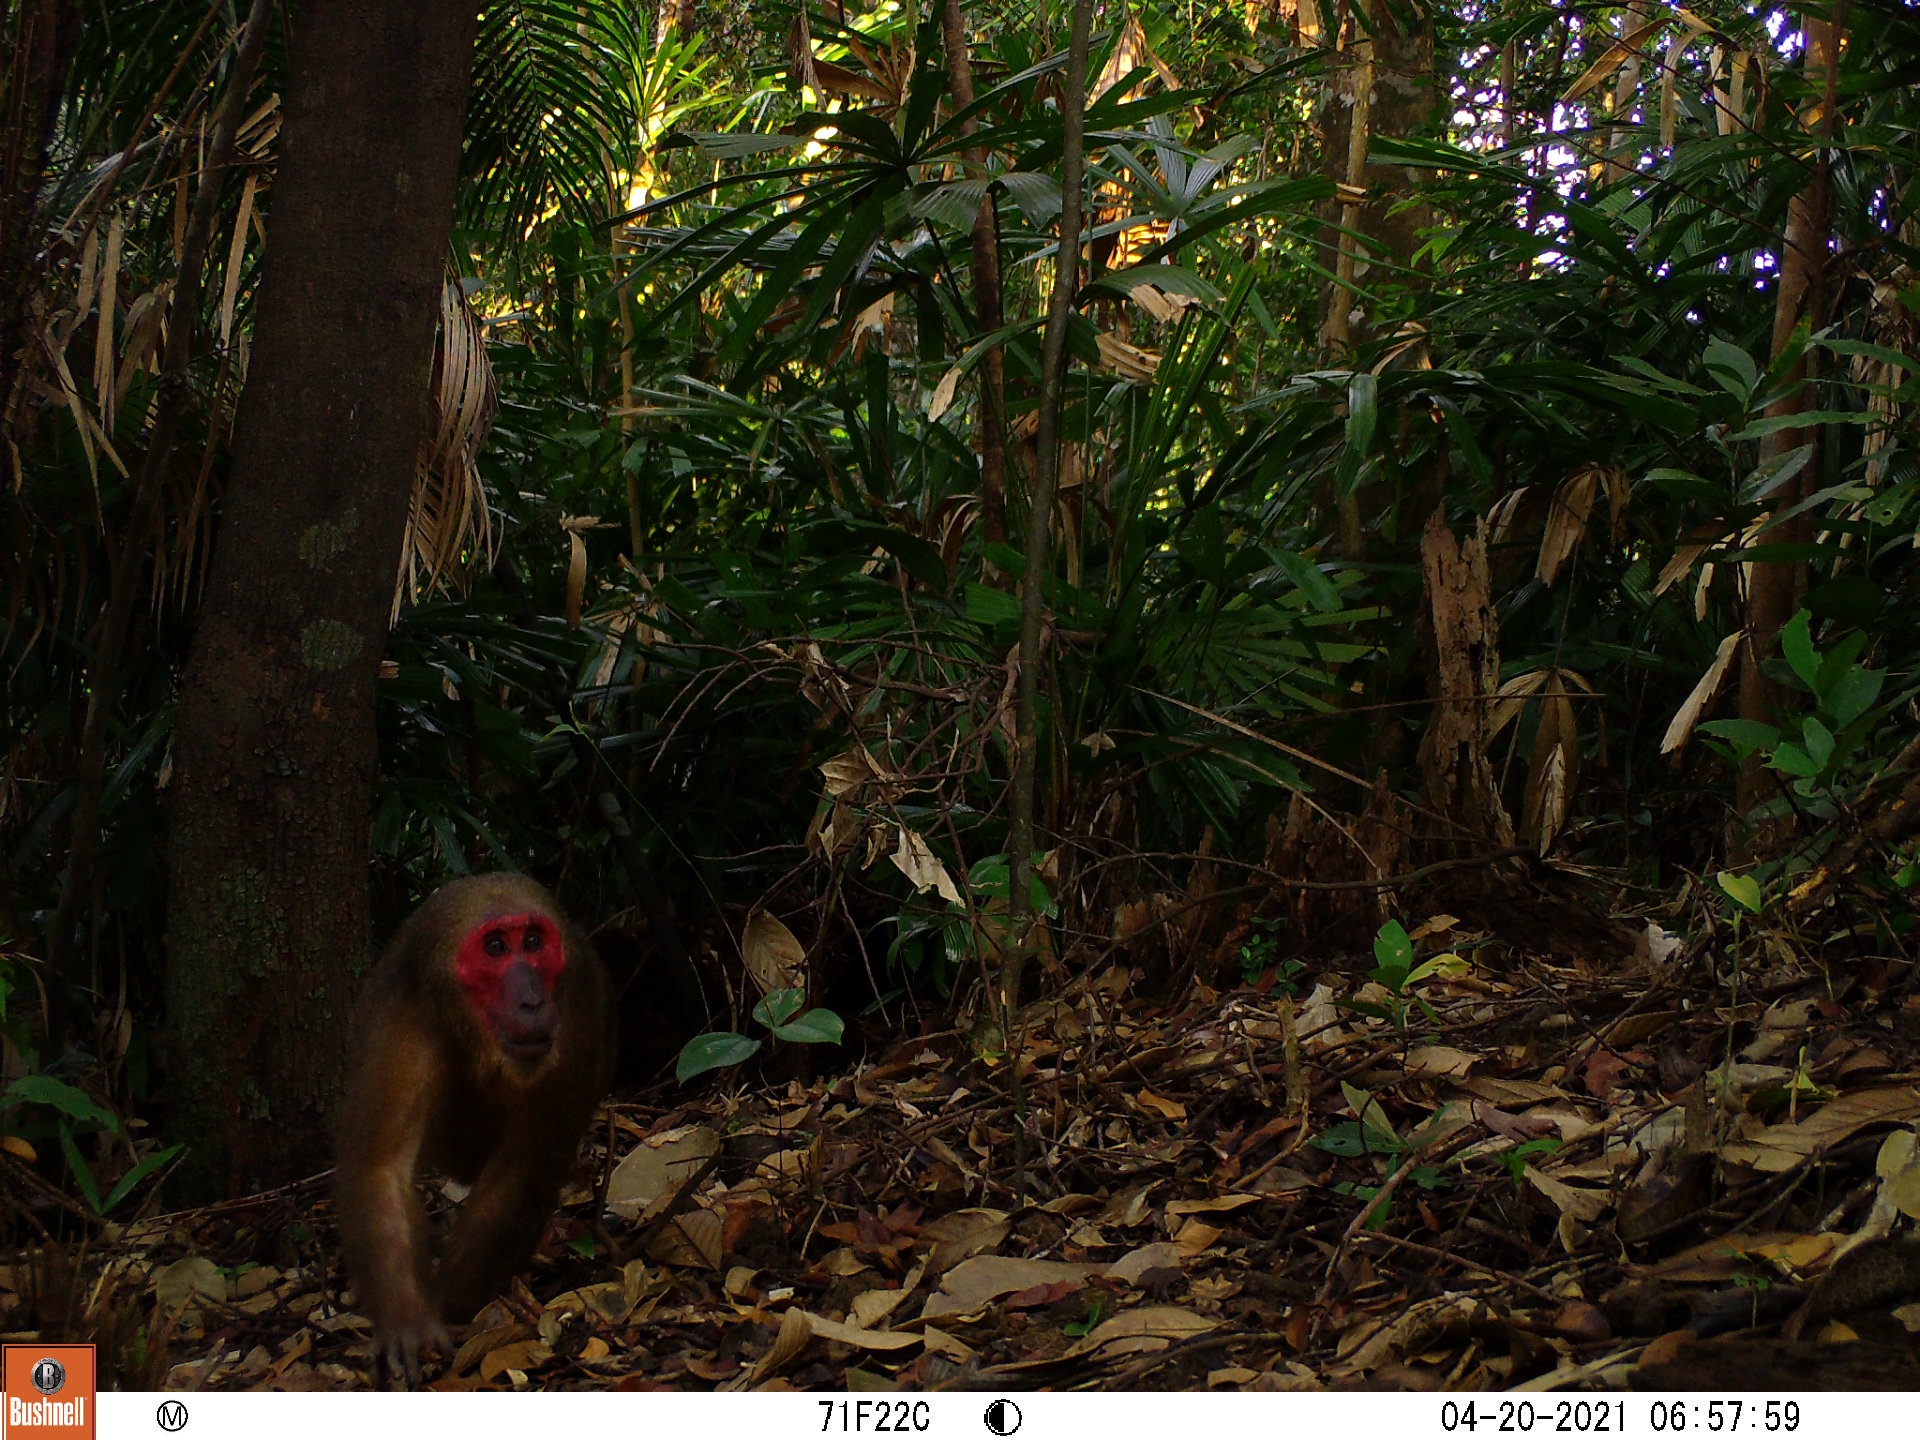 A red-faced monkey was captured in 2021.